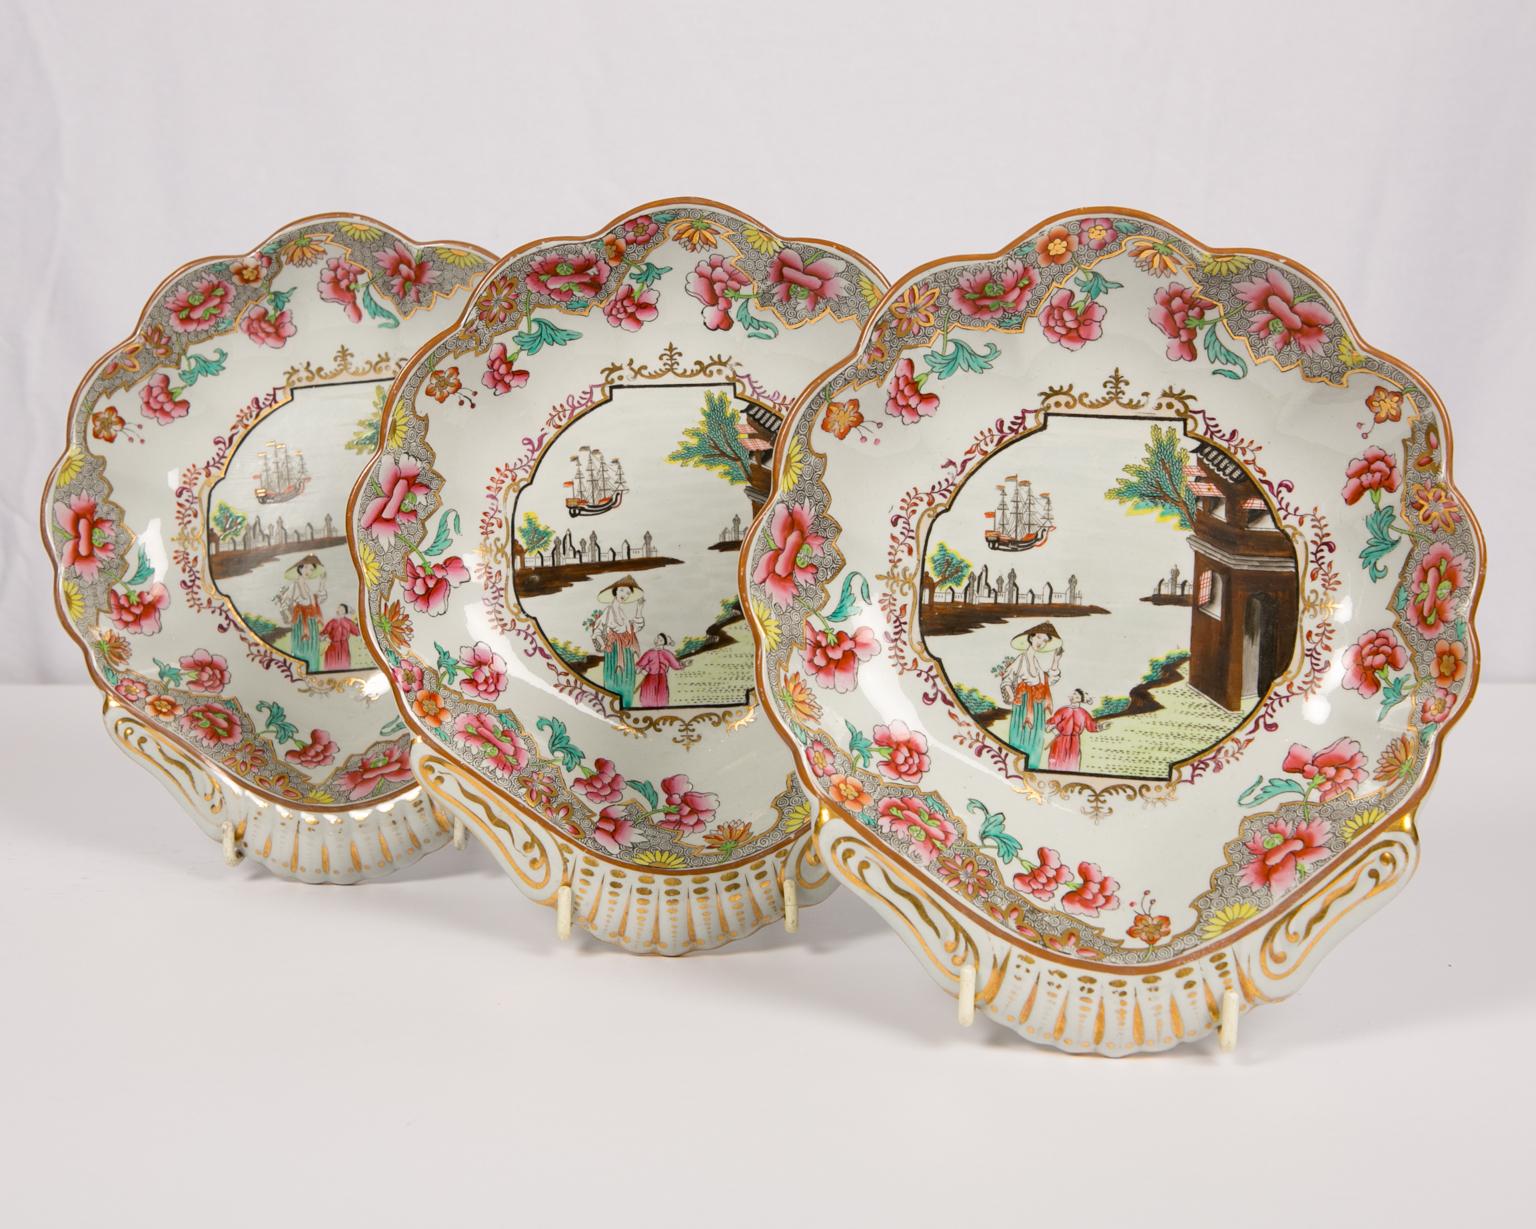 English Antique Set of Eight Shaped Dishes in the Spode Mandarin Pattern circa 1820